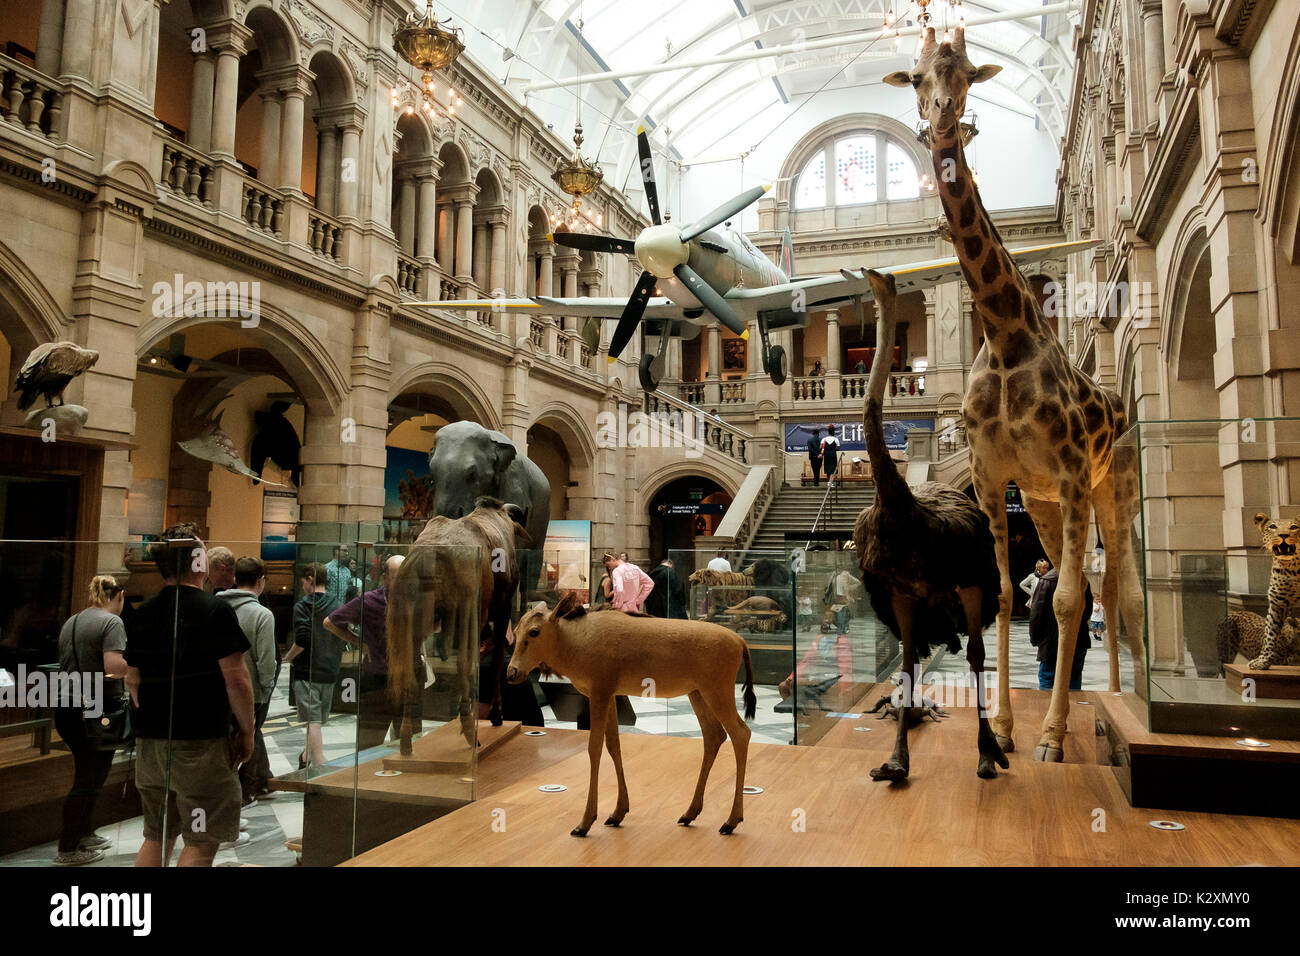 Diverse exhibits at Kelvingrove Art Gallery and Museum, Glasgow Stock Photo